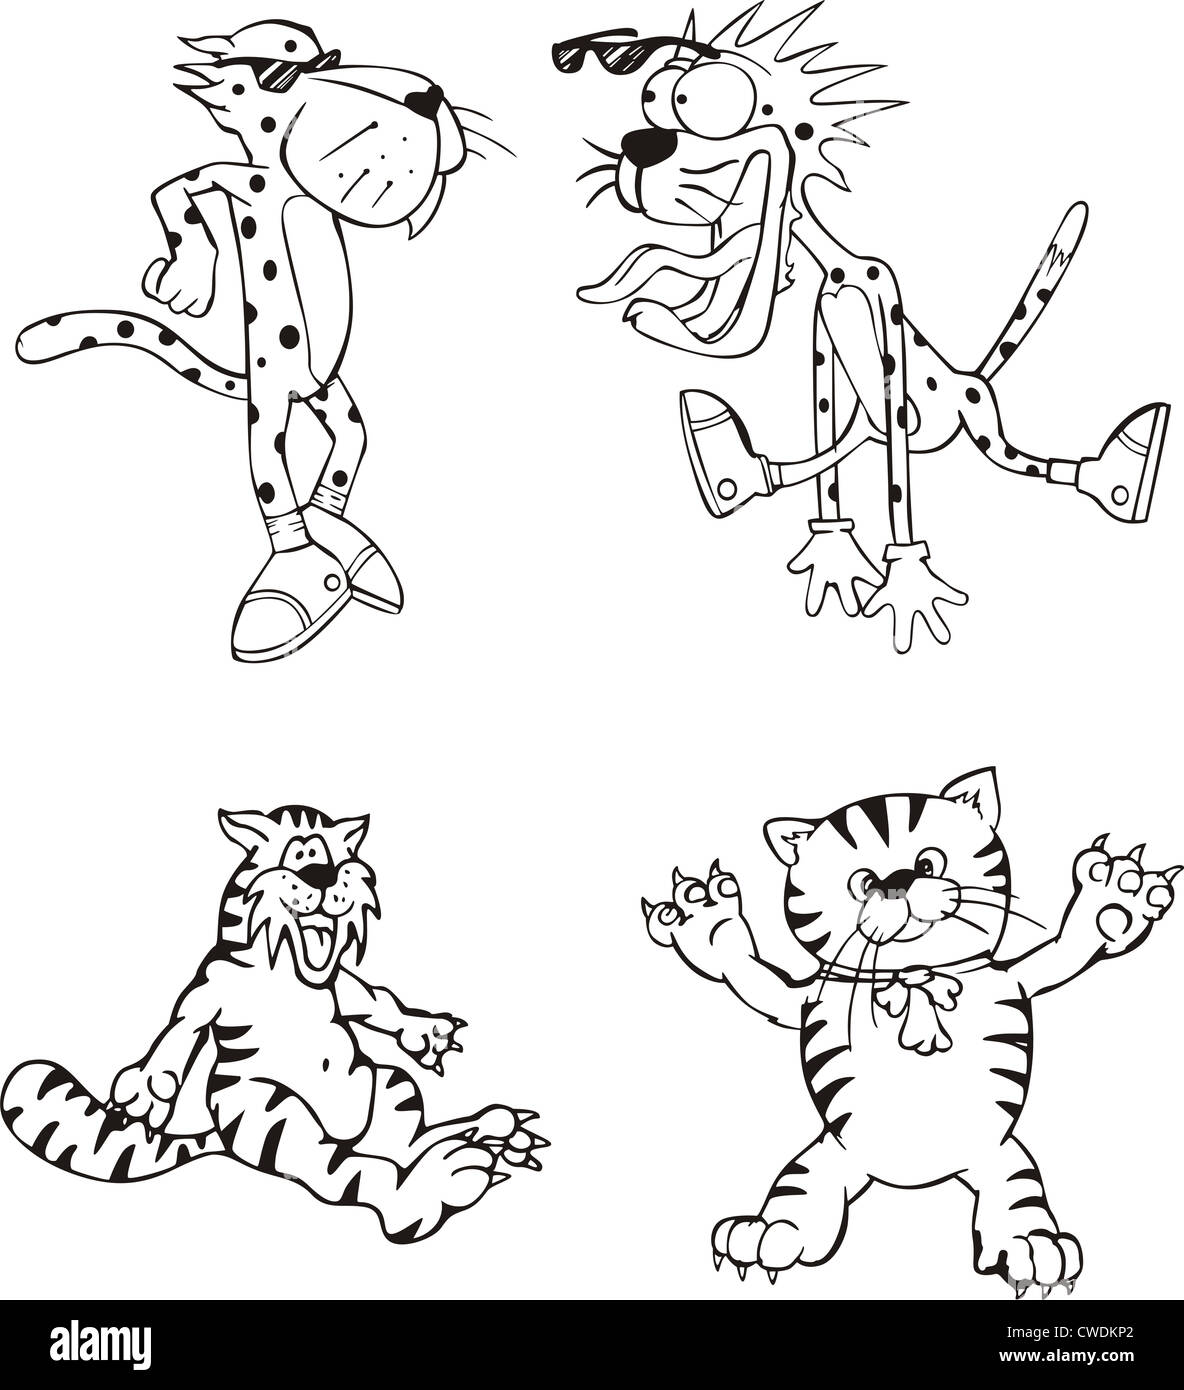 Leopard and Cat Cartoon Characters. Set of black and white vector illustrations. Stock Photo